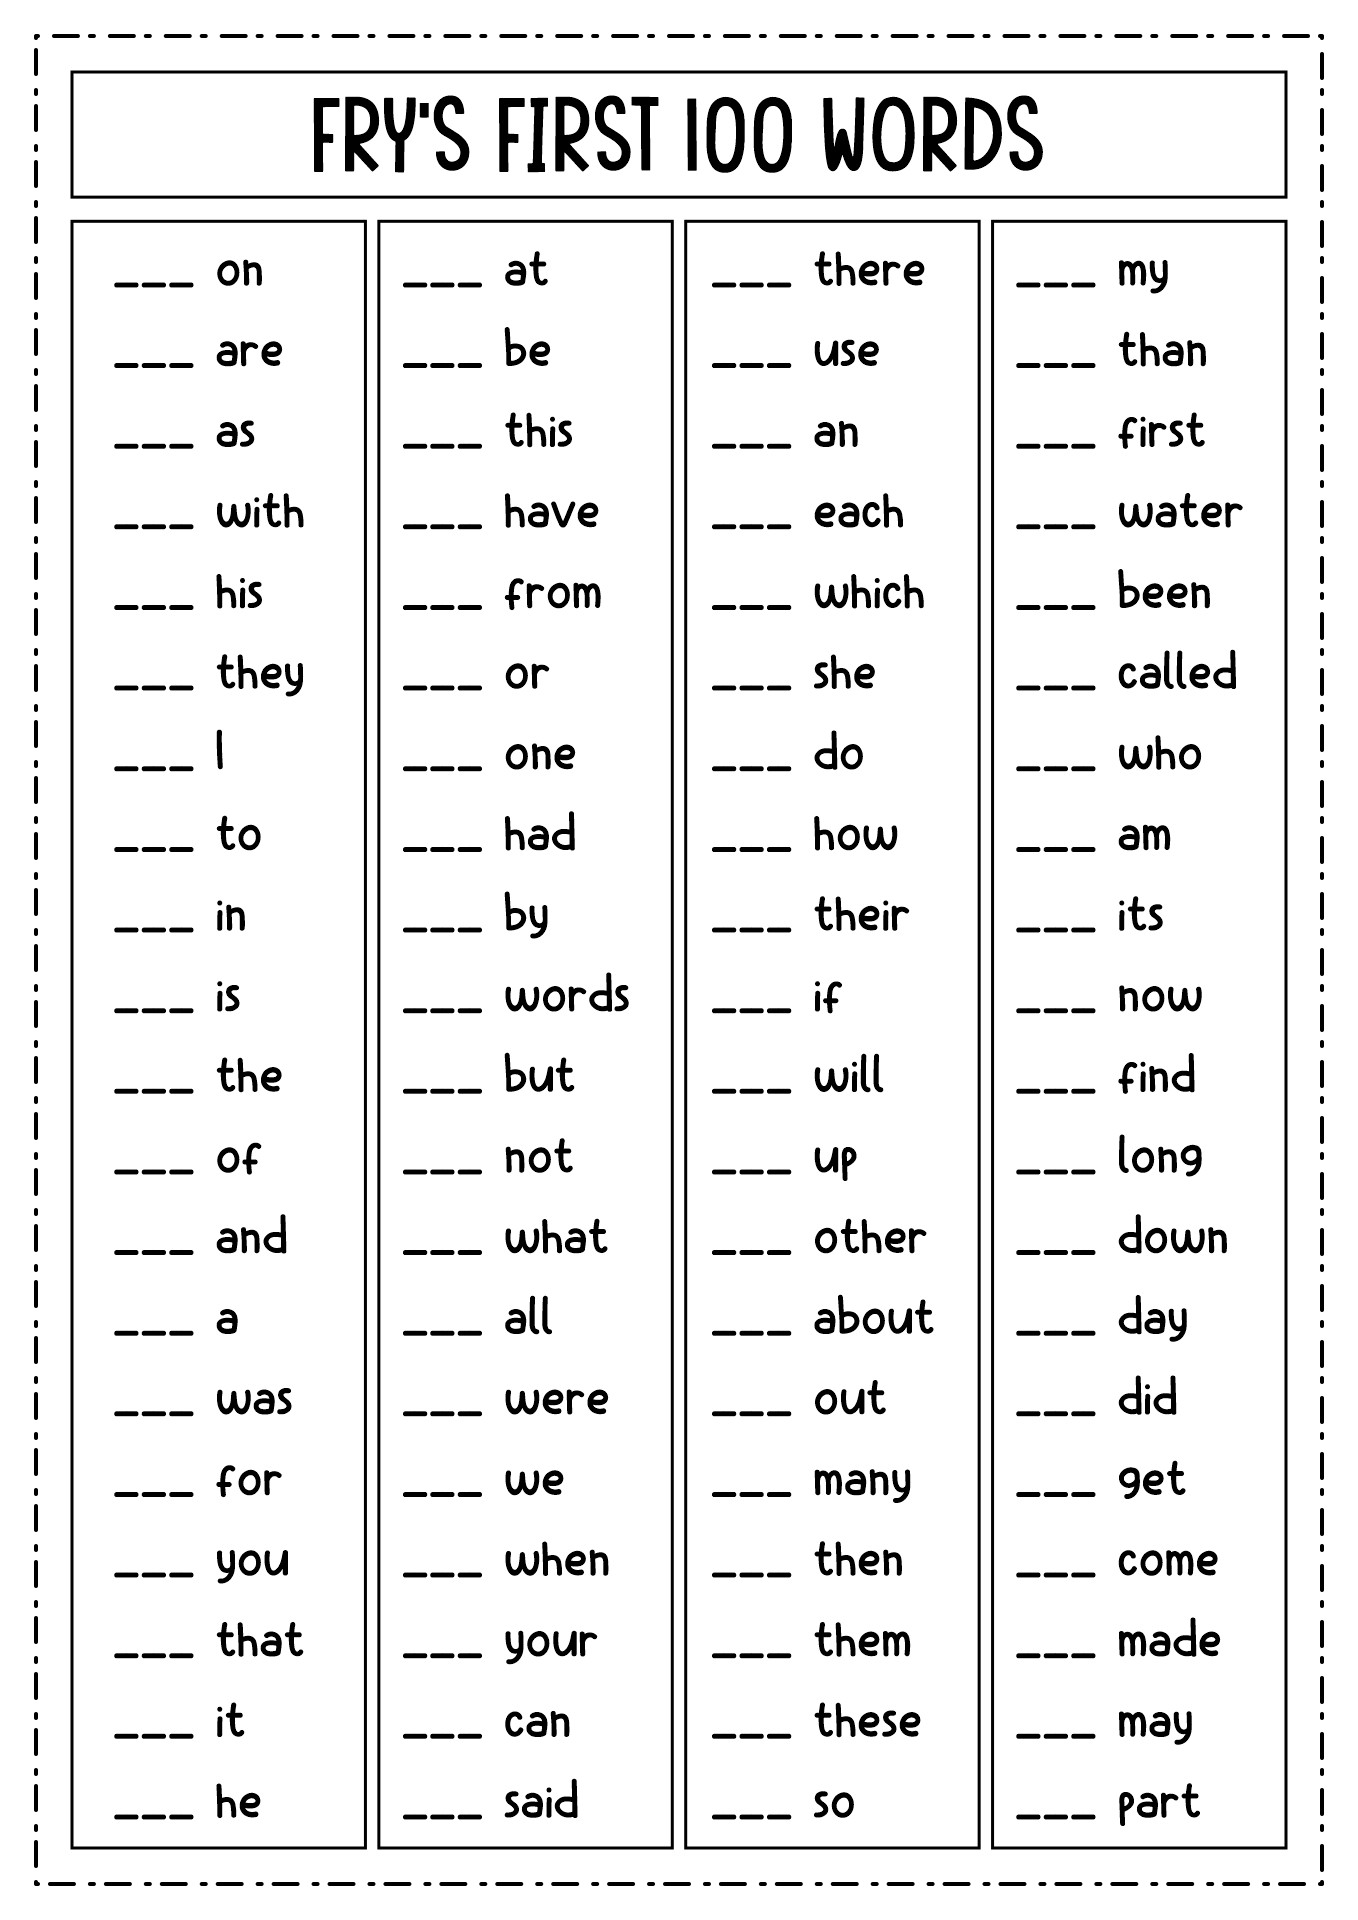 19 Best Images of Fry's First 100 Words Worksheets - 100 Fry Sight Word